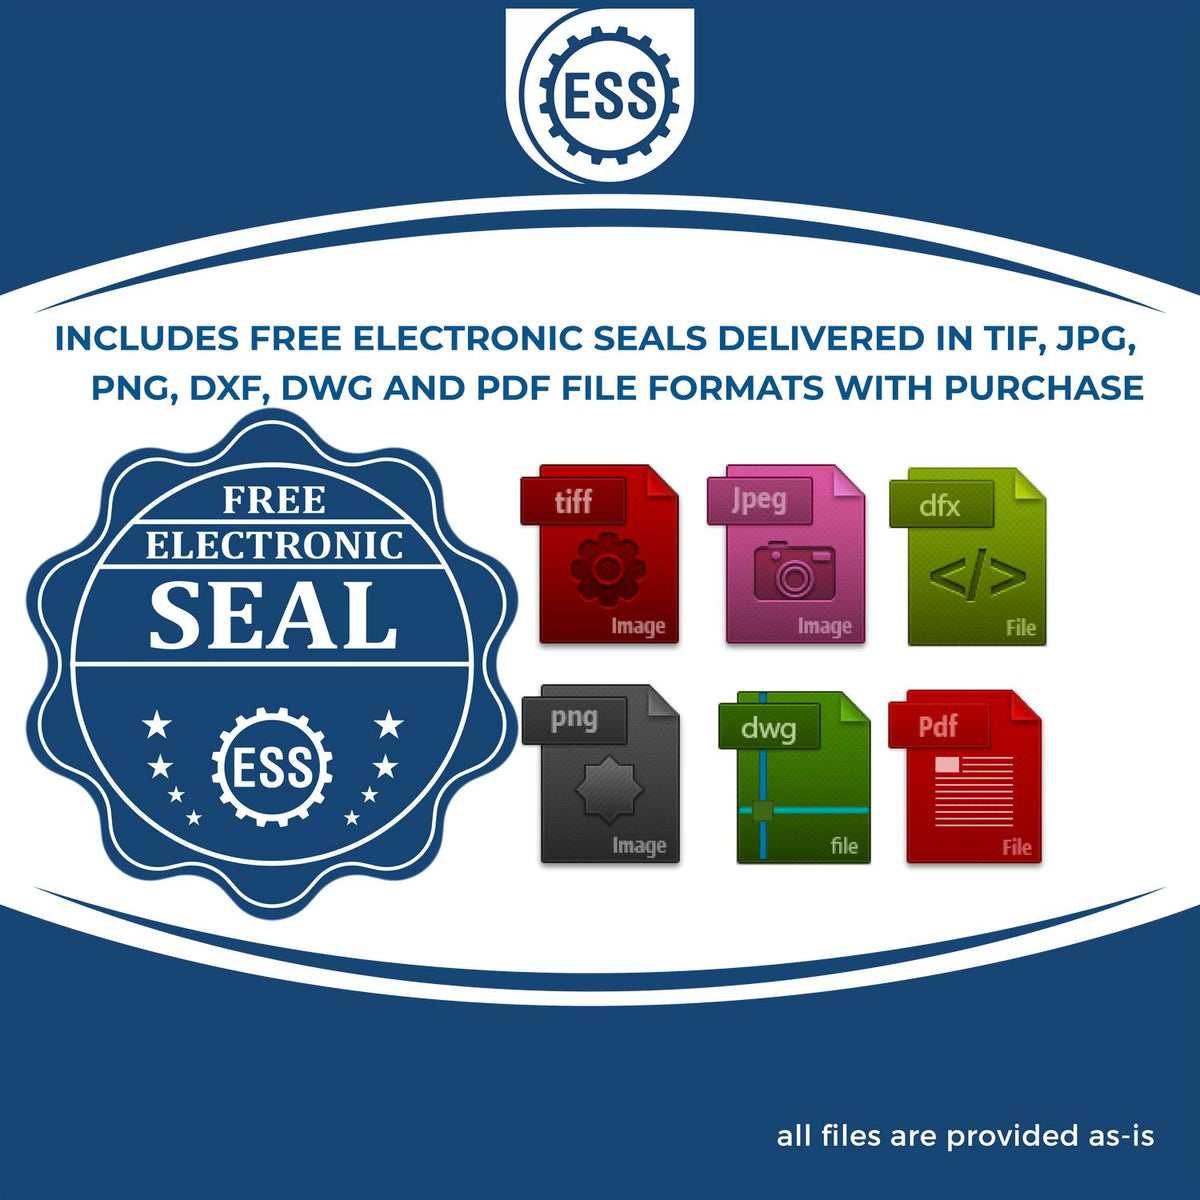 An infographic for the free electronic seal for the Hybrid Maine Architect Seal illustrating the different file type icons such as DXF, DWG, TIF, JPG and PNG.